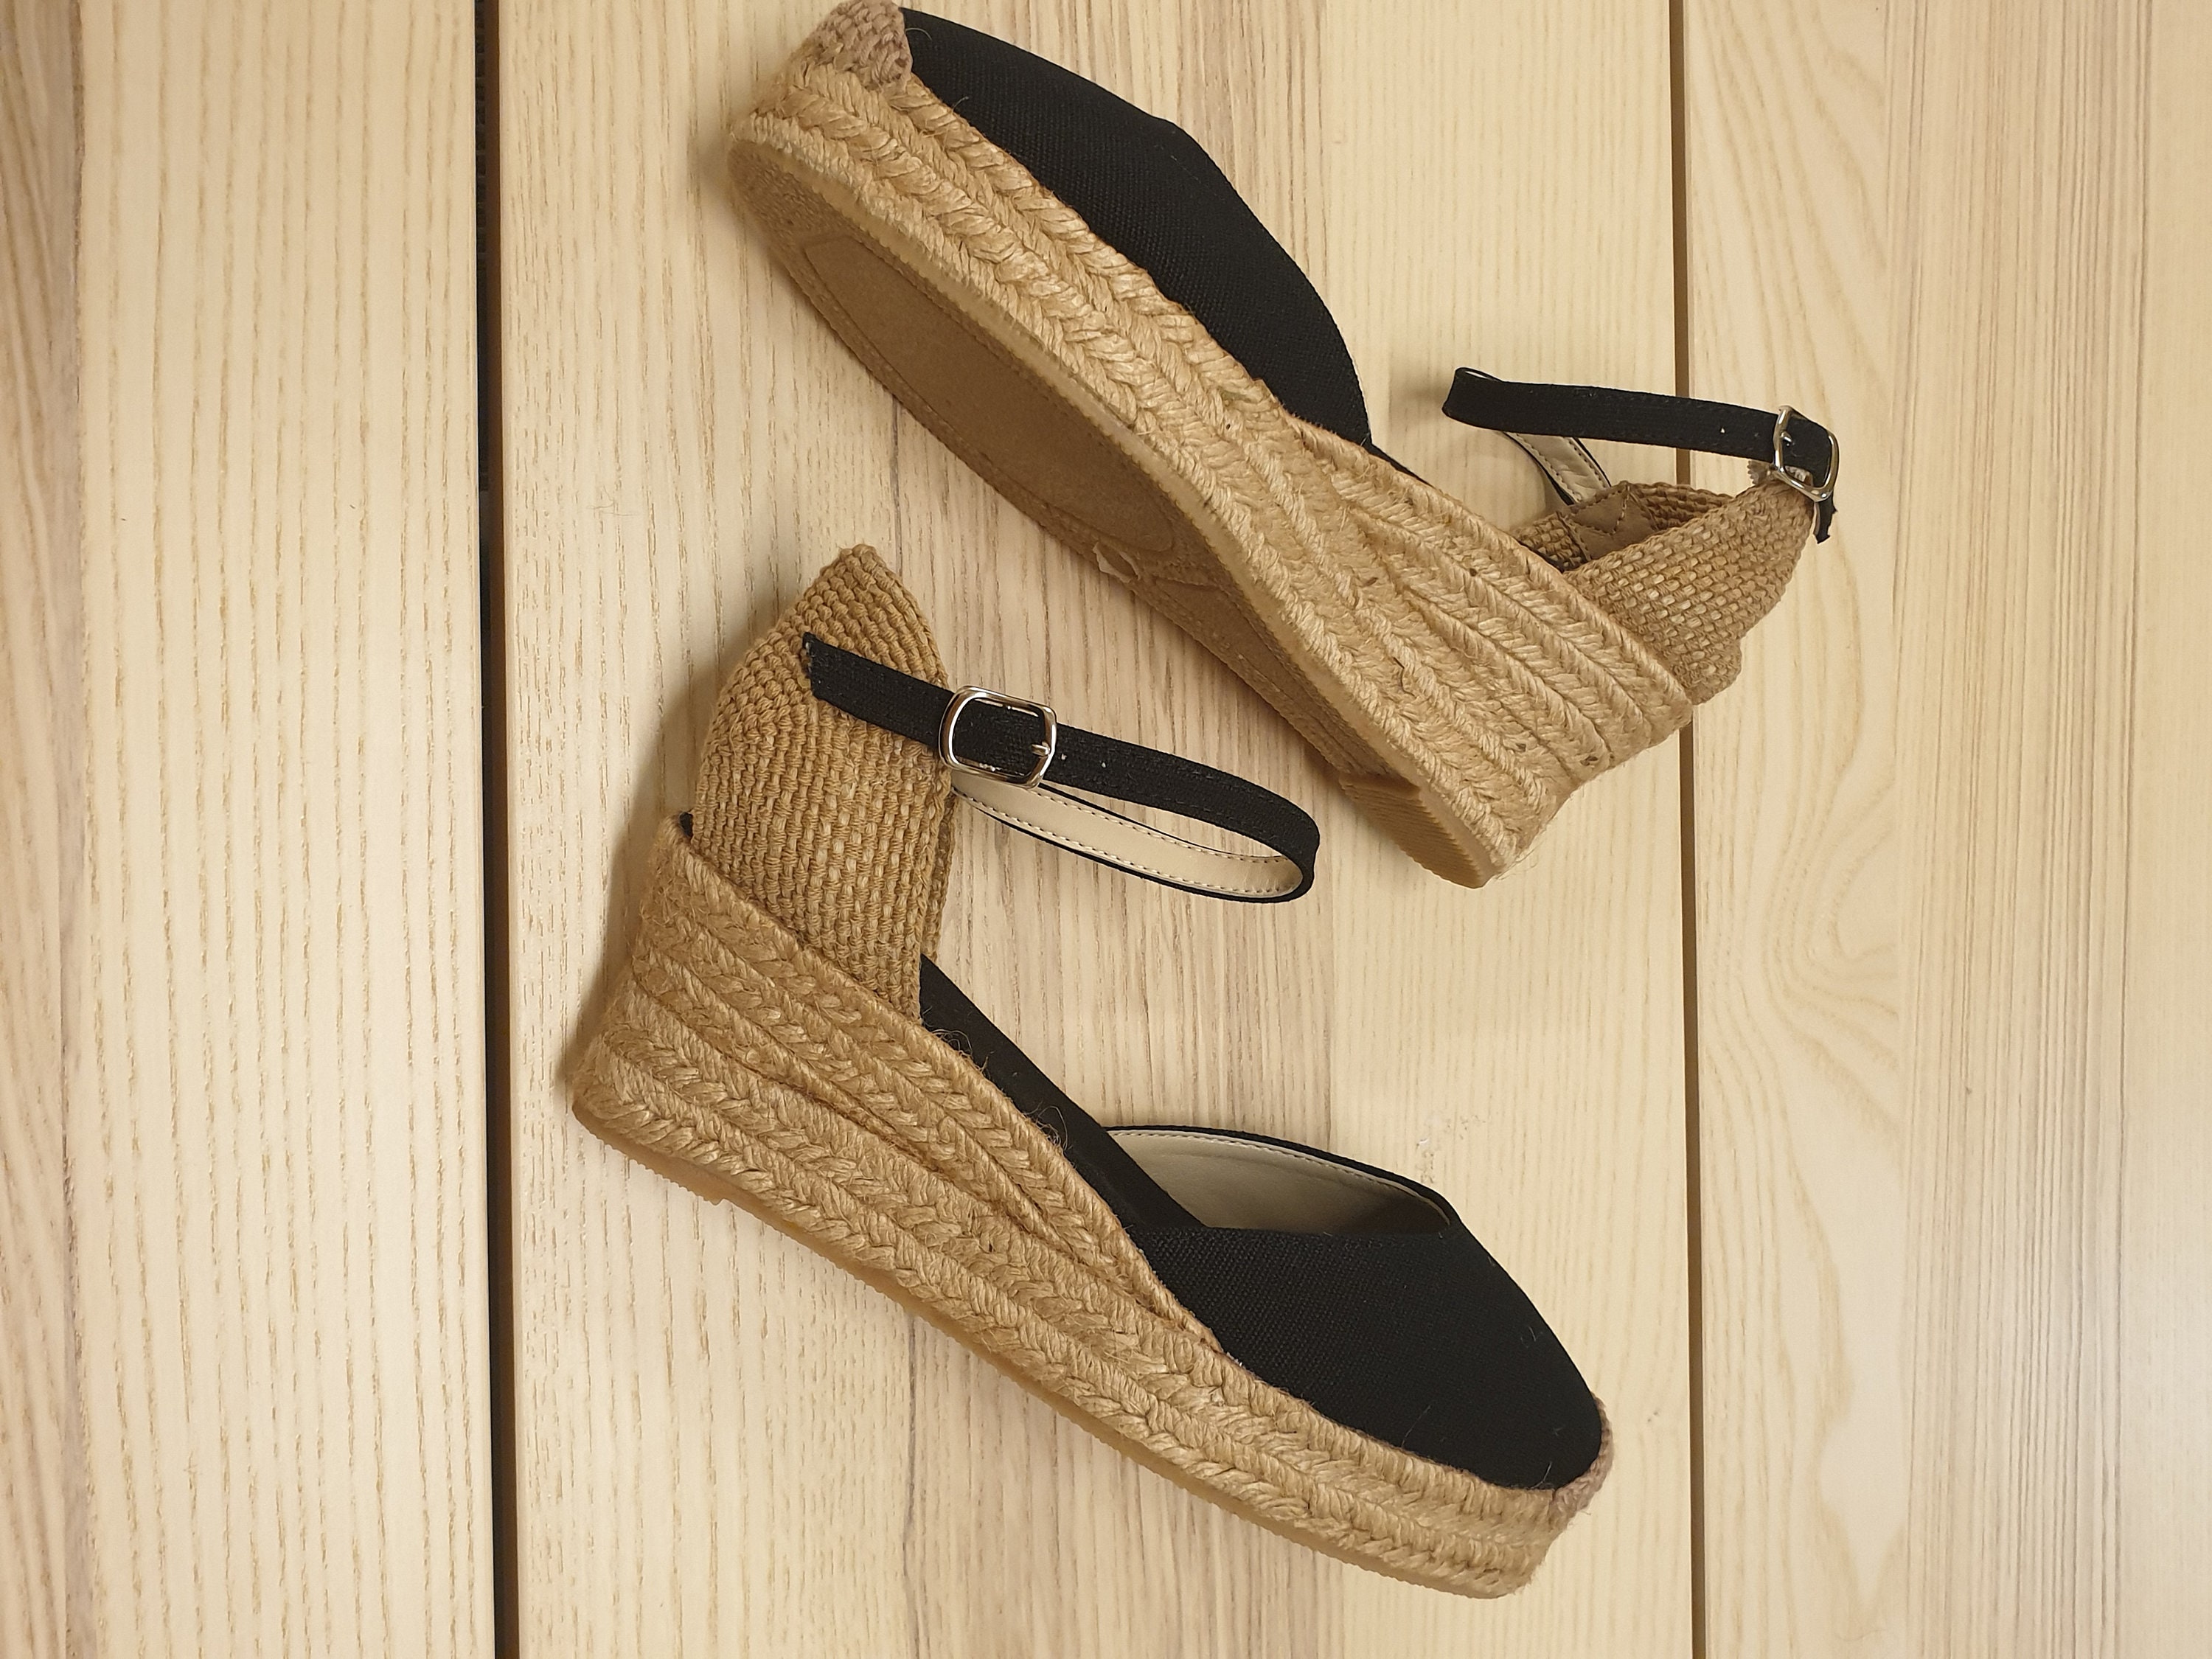 ESPADRILLES PLATFORMS WEDGES: Ankle strap espadrille low wedges with ...